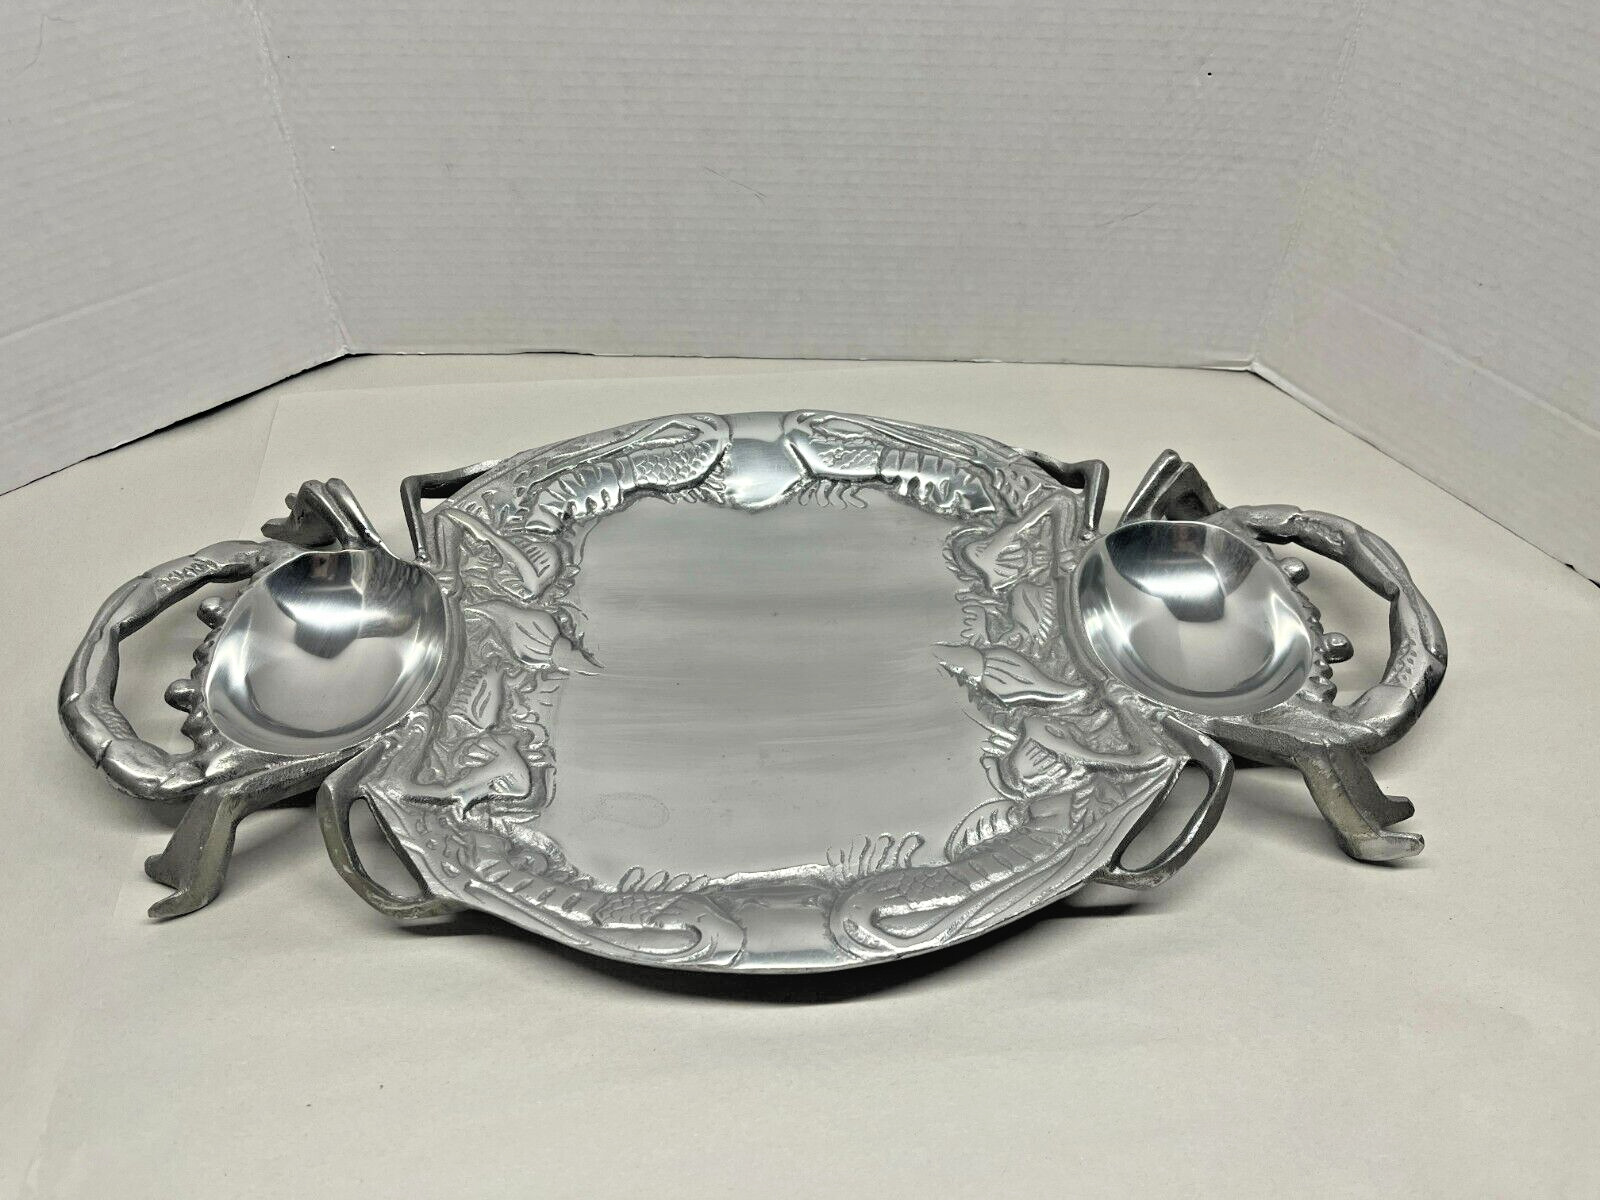 Large Aluminum Crabs Shaped Appetizer Seafood Serving Tray; 21